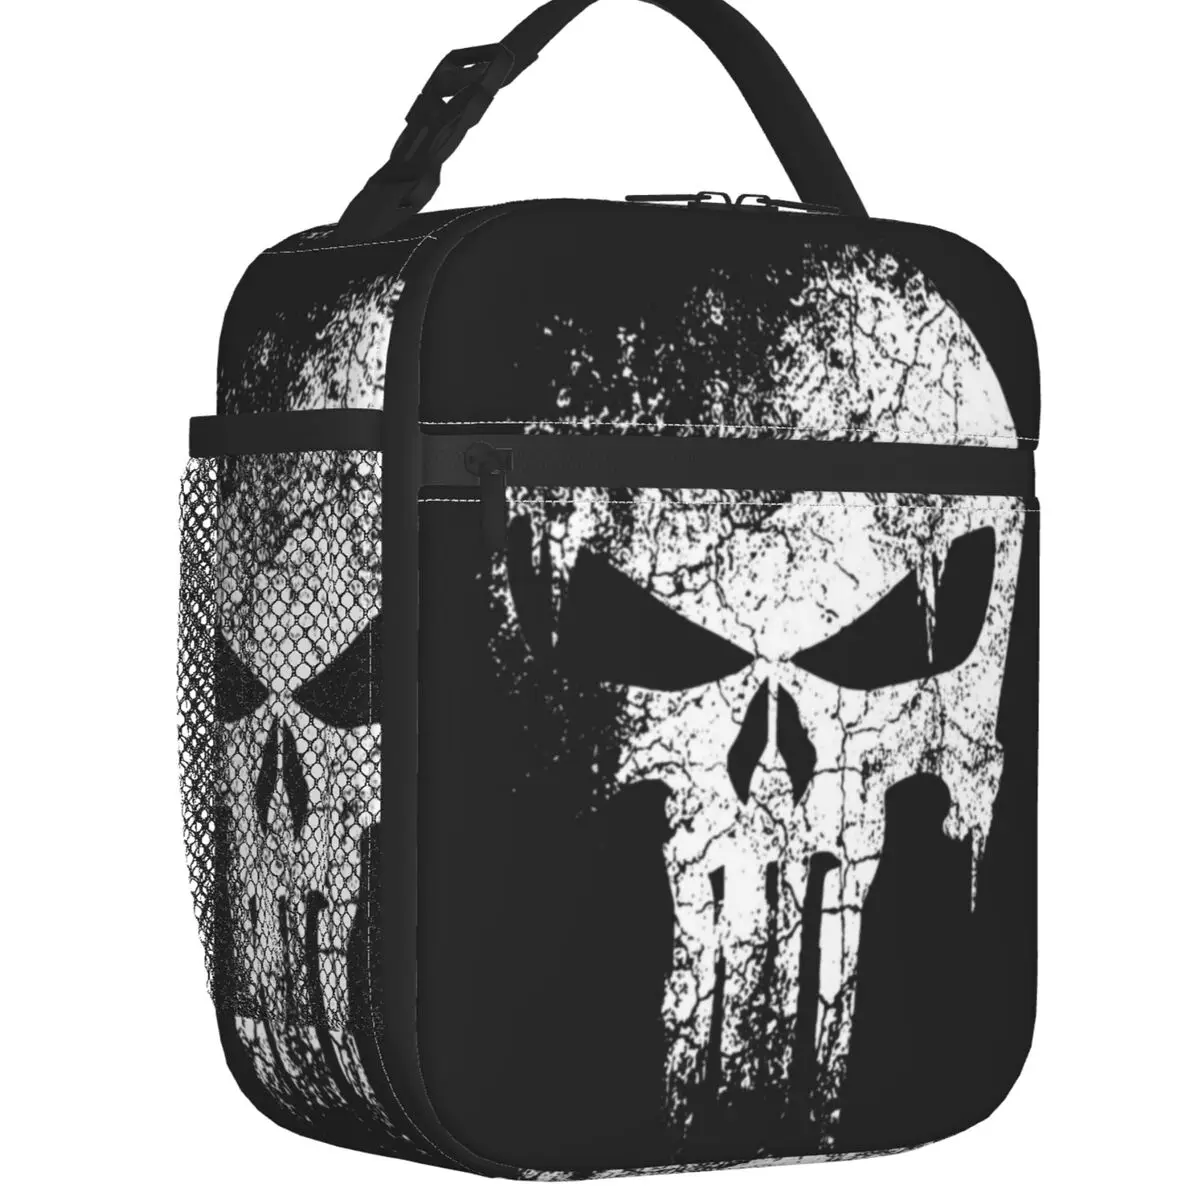 Skeleton Skull Heavy Metal Thermal Insulated Lunch Bags Women Resuable Lunch Container for Kids School Children Storage Food Box